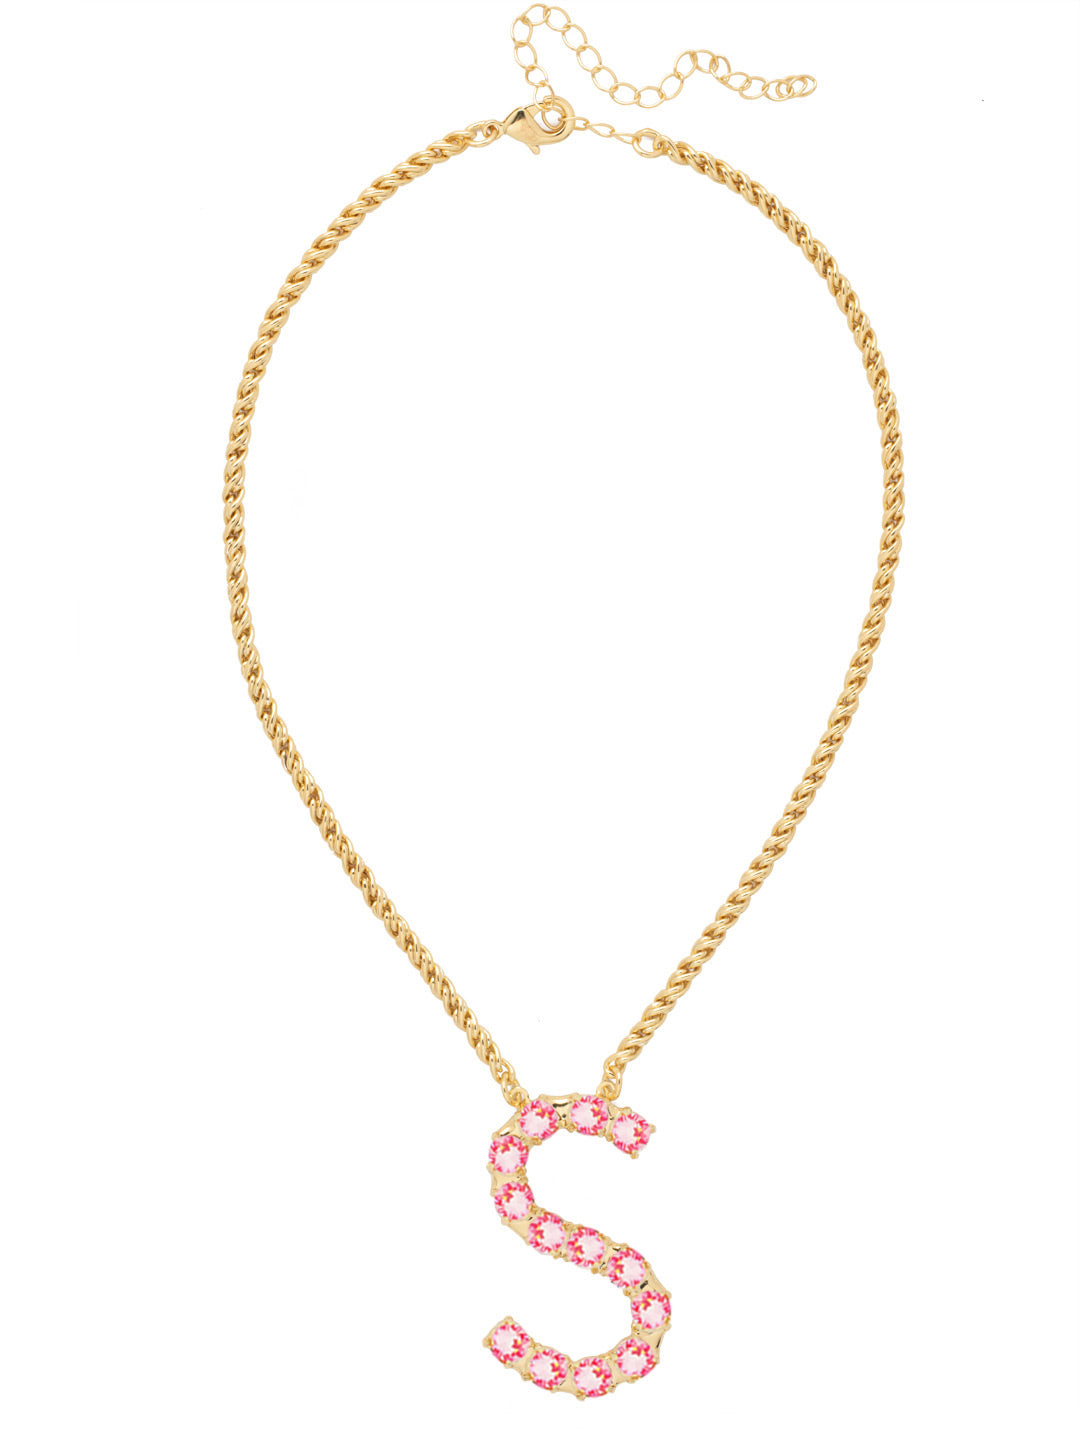 S Initial Rope Pendant Necklace - NFK38BGETP